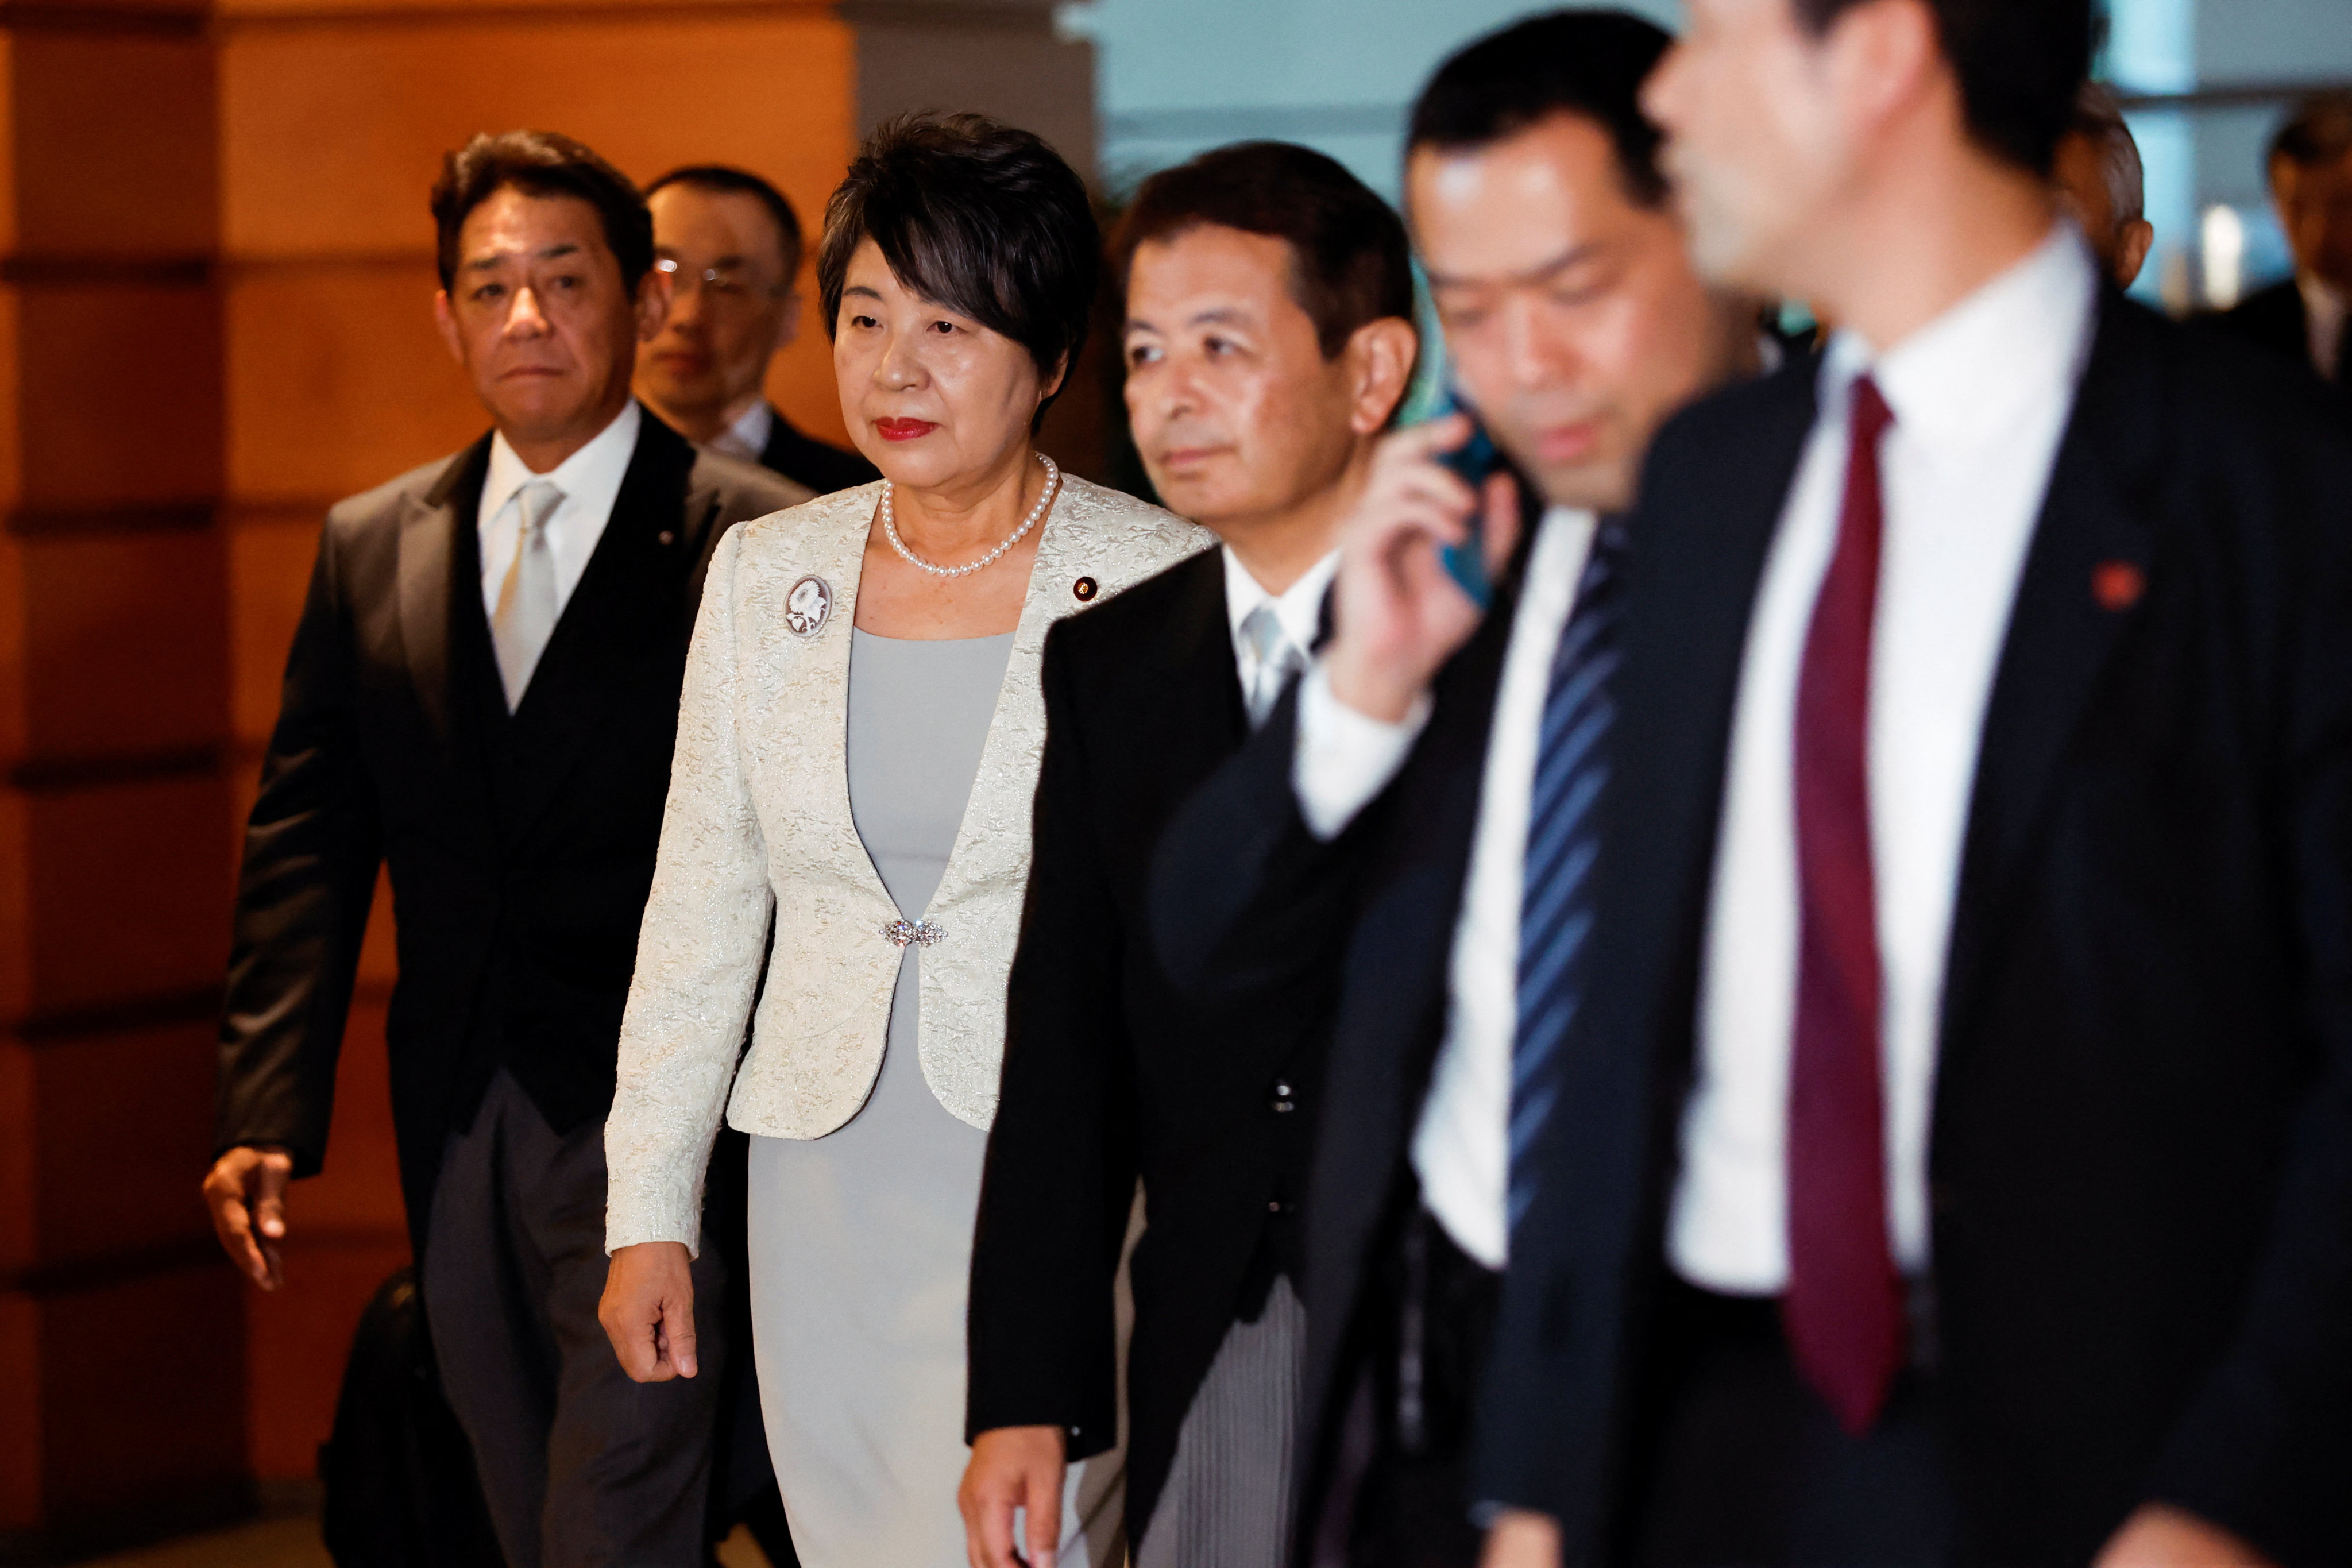 Japan’s Foreign Minister Yoko Kamikawa during the day of the cabinet reshuffle in Tokyo on September 13. Photo: Reuters